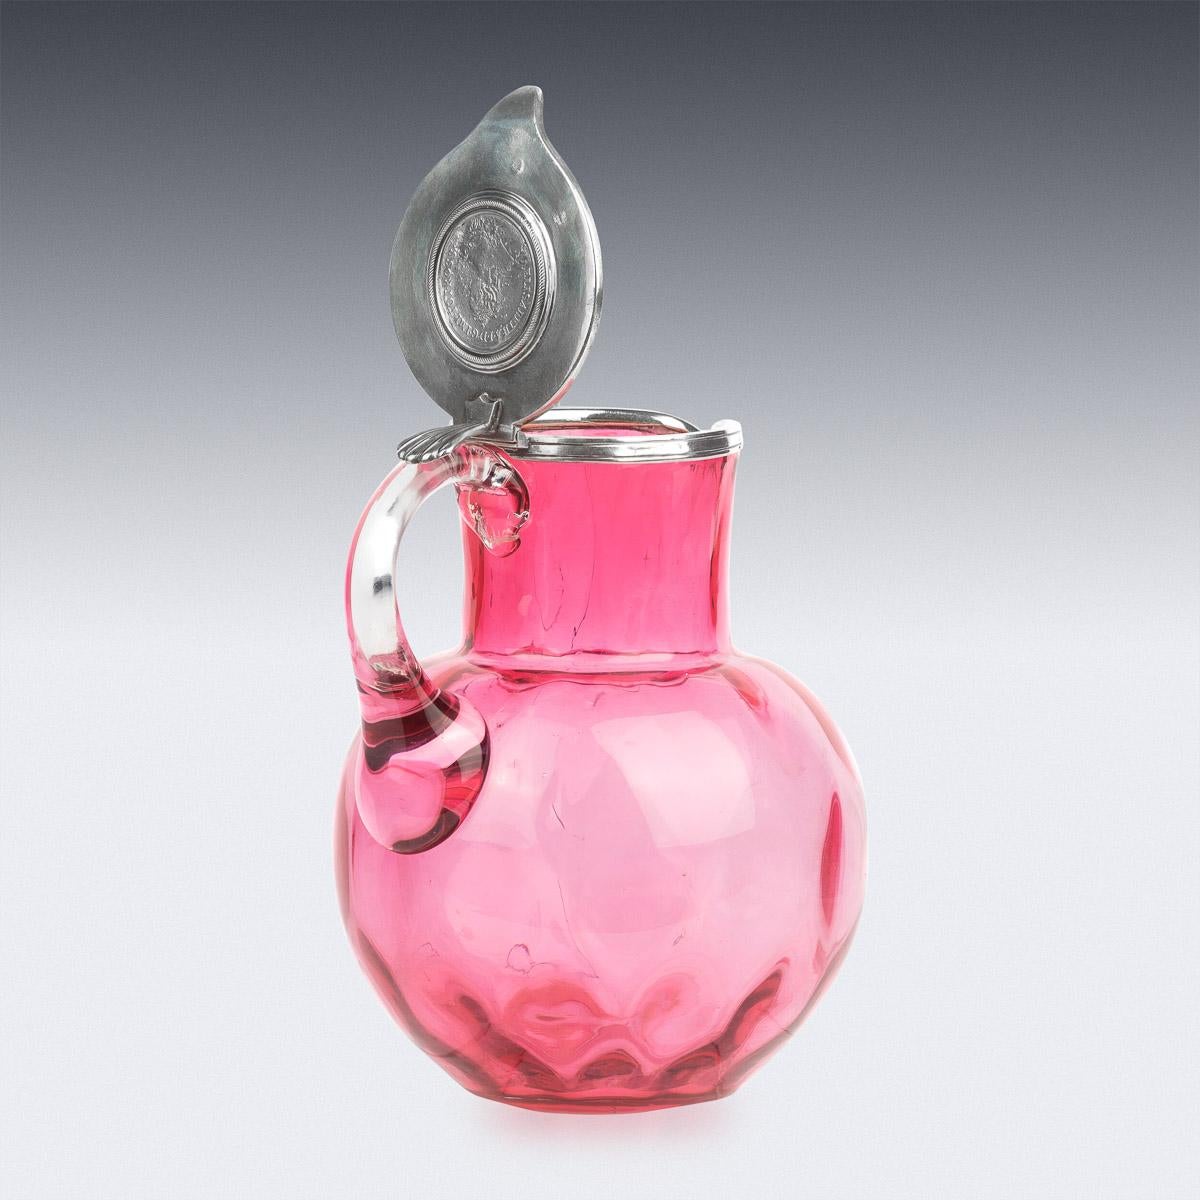 19th century Russian Faberge silver & blown glass jug, the plain pink glass body applied with a silver lid and set with a coin, the hinged lid applied with a shell shaped thumbpiece.

Hallmarked Russian silver 88 (915 standard), St-Petersburg,